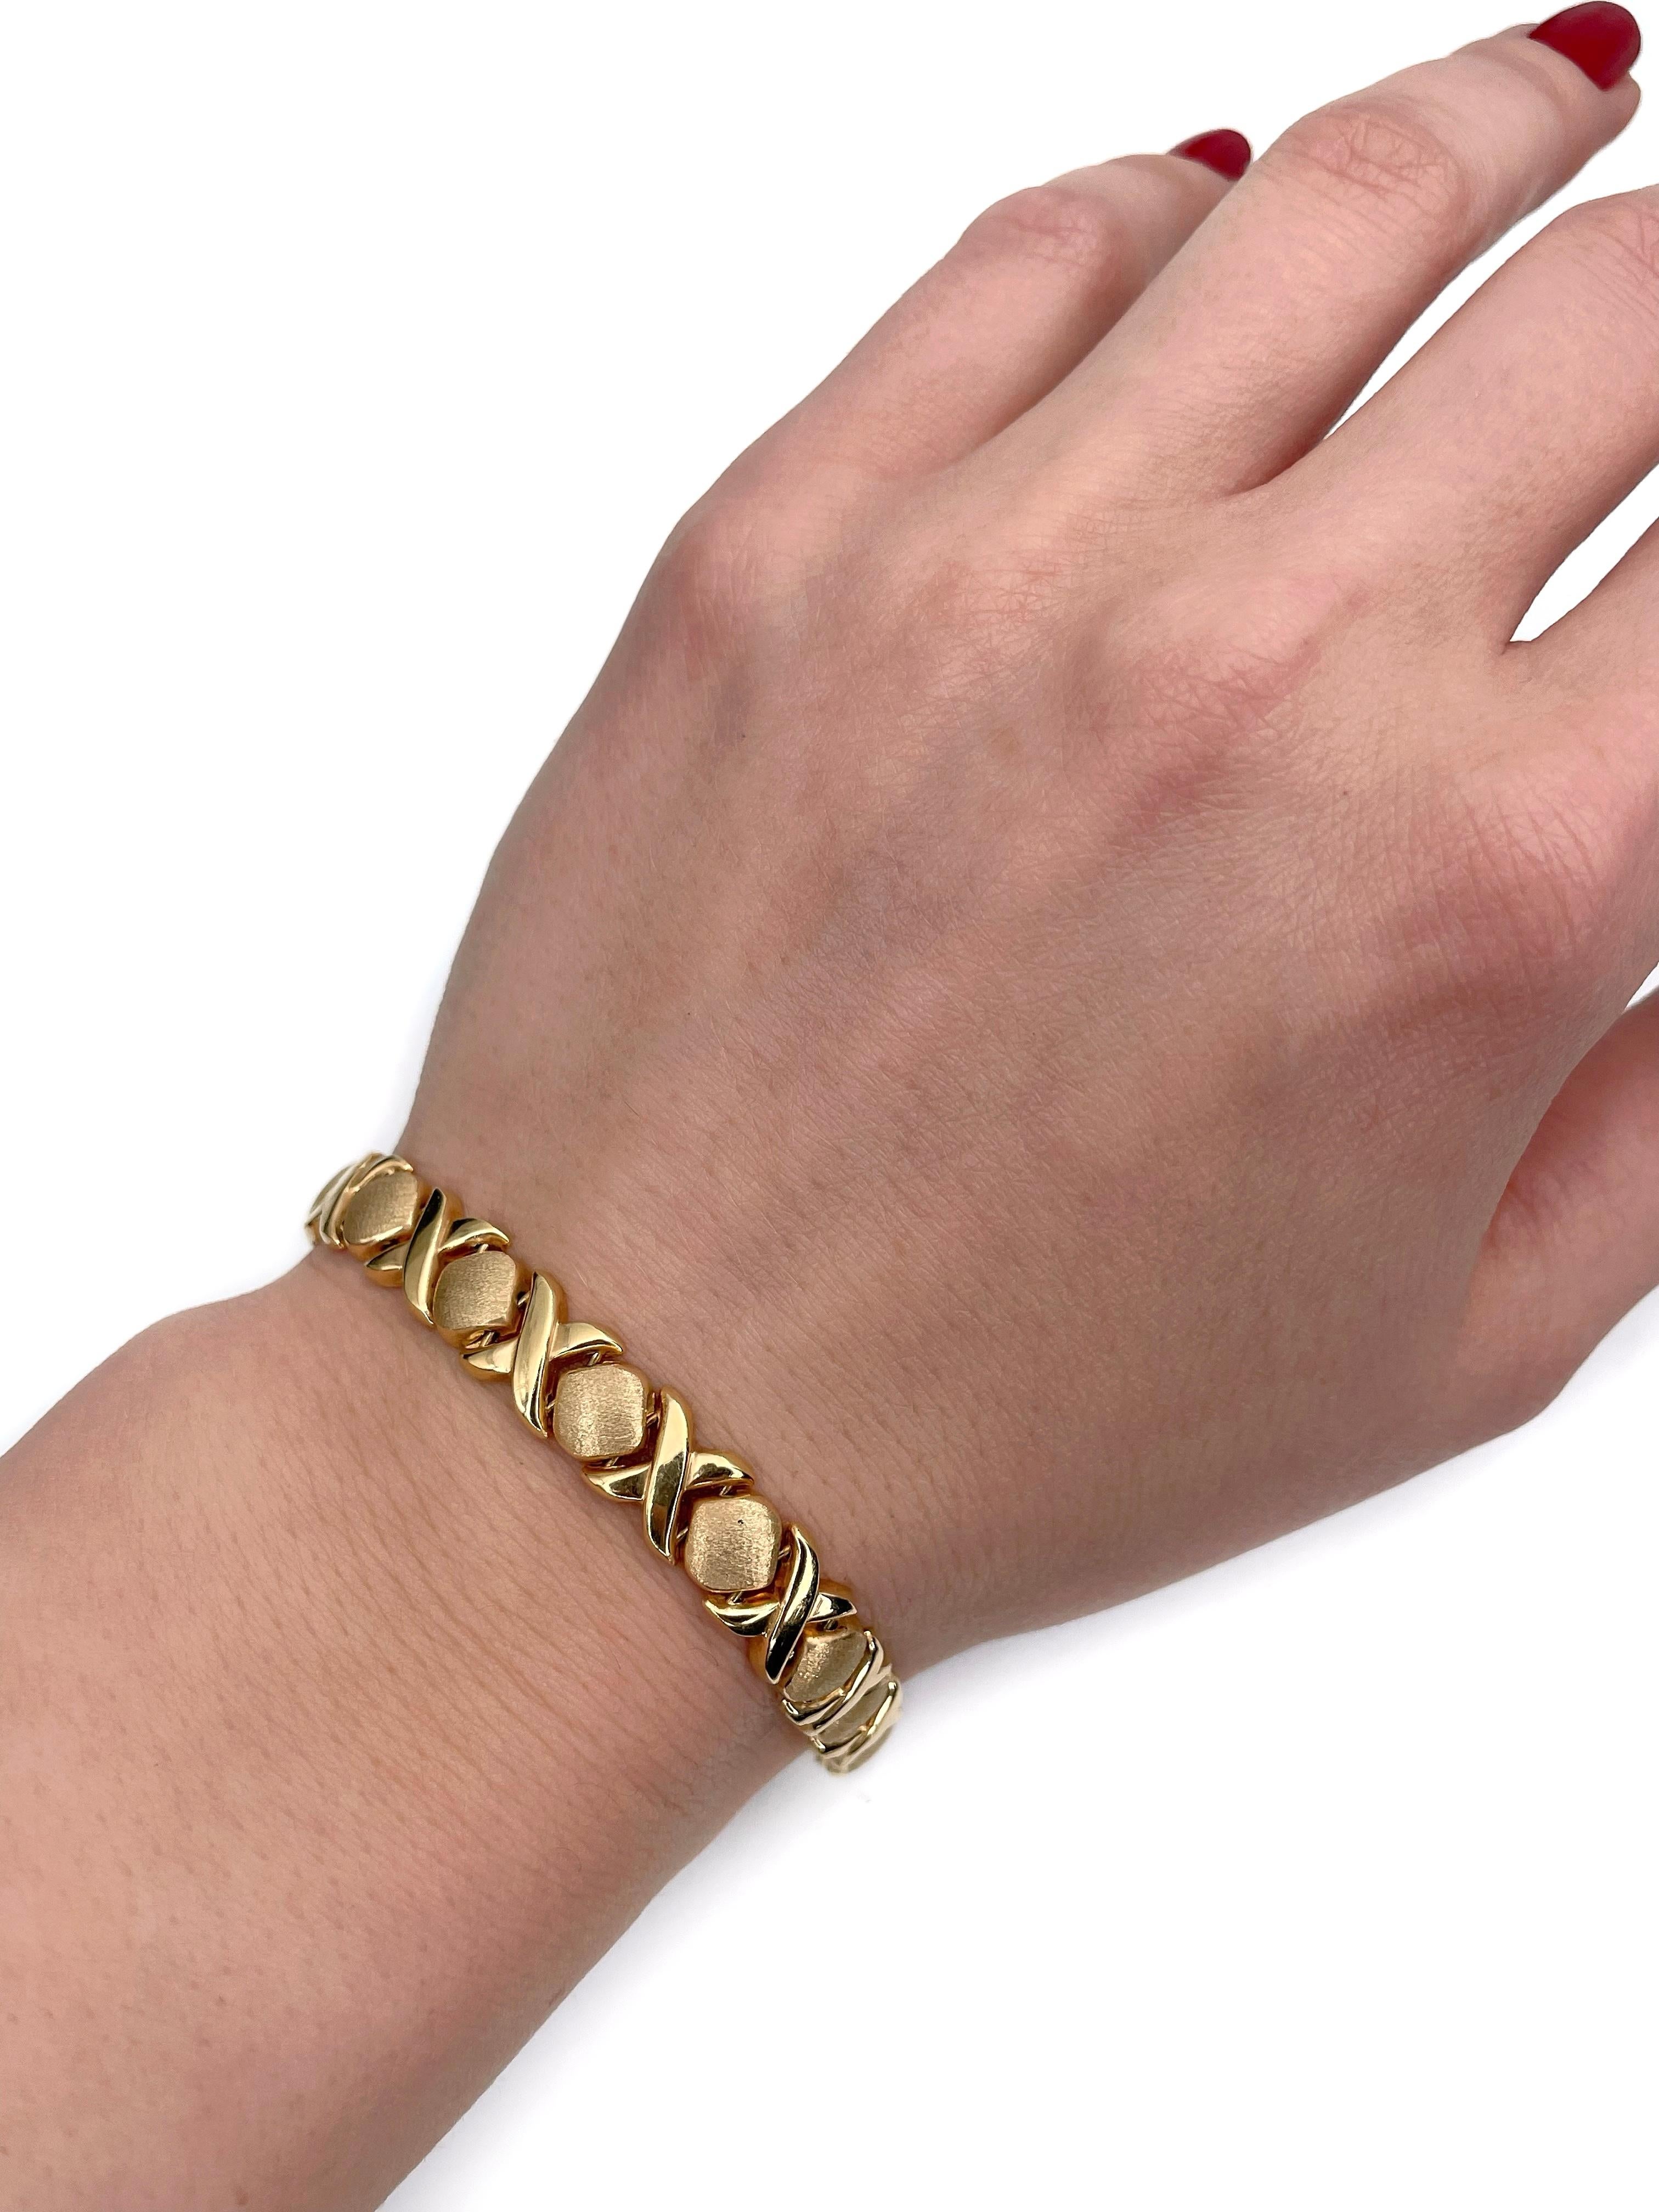 It is a vintage xoxo chain link bracelet crafted in 18K yellow gold. Circa 1980. 

It has a safe closure.

Weight: 16.05g
Length: 18.5cm

———

If you have any questions, please feel free to ask. We describe our items accurately. Please note that in